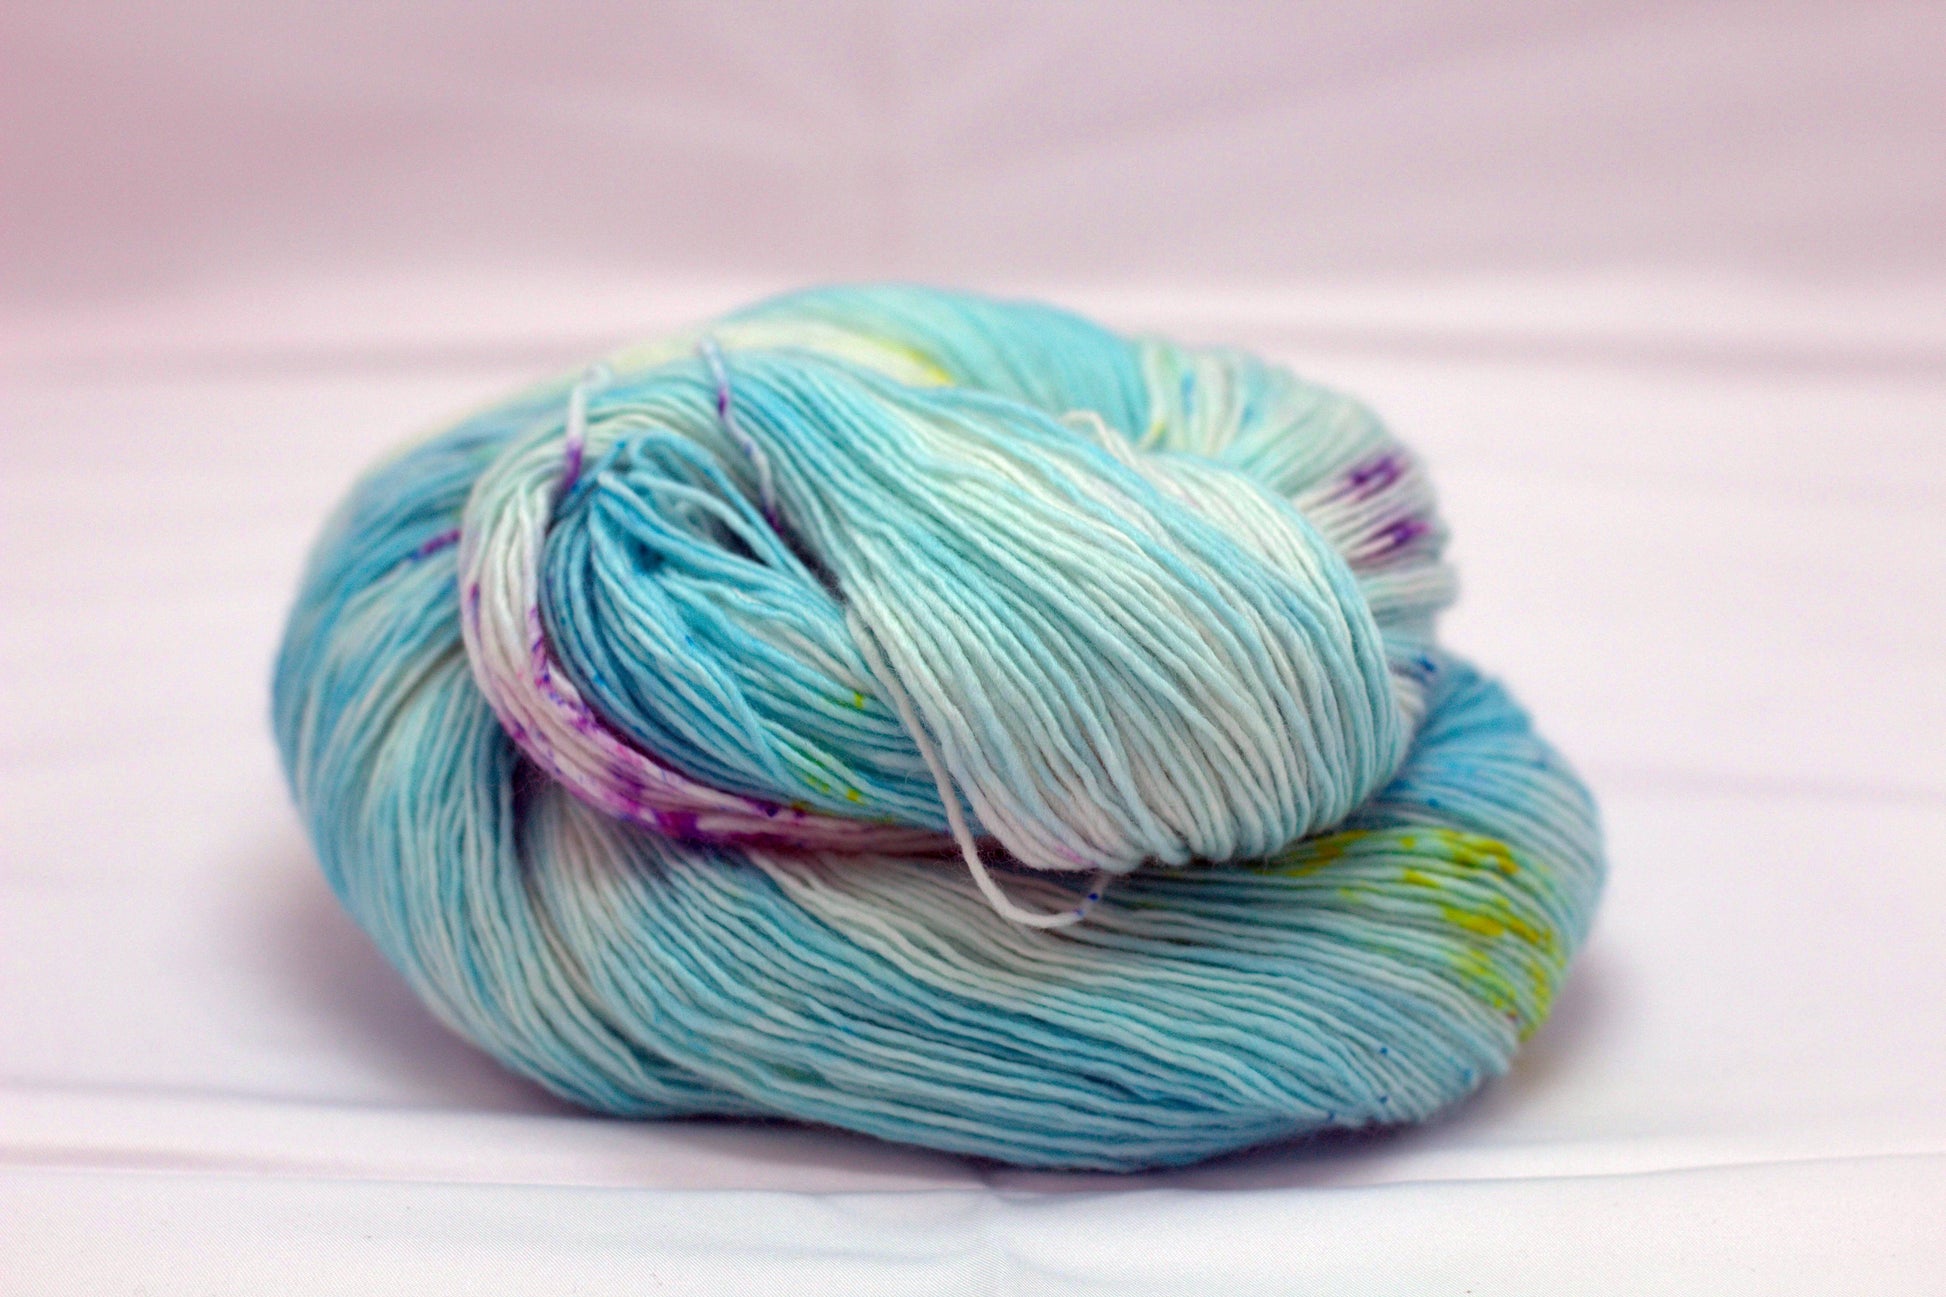 One curled skein of variegated turquoise and white yarn with yellow and purple speckles on white background.